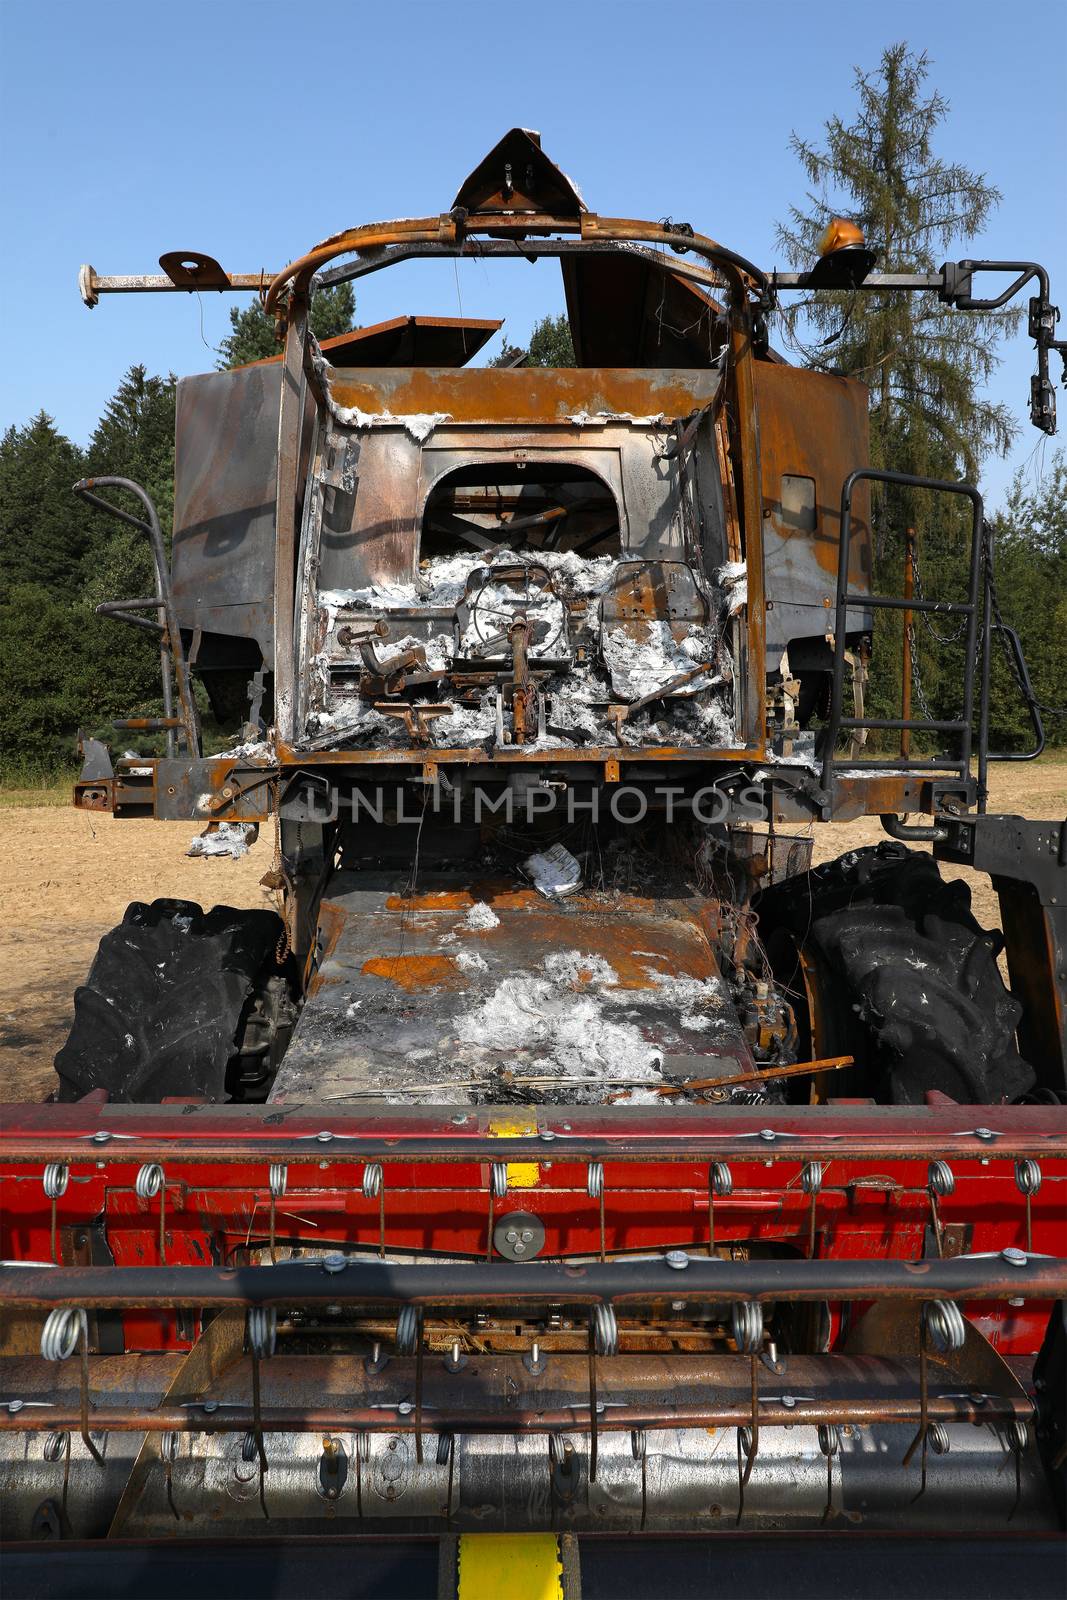 Burnt out combine harvester in field - front view